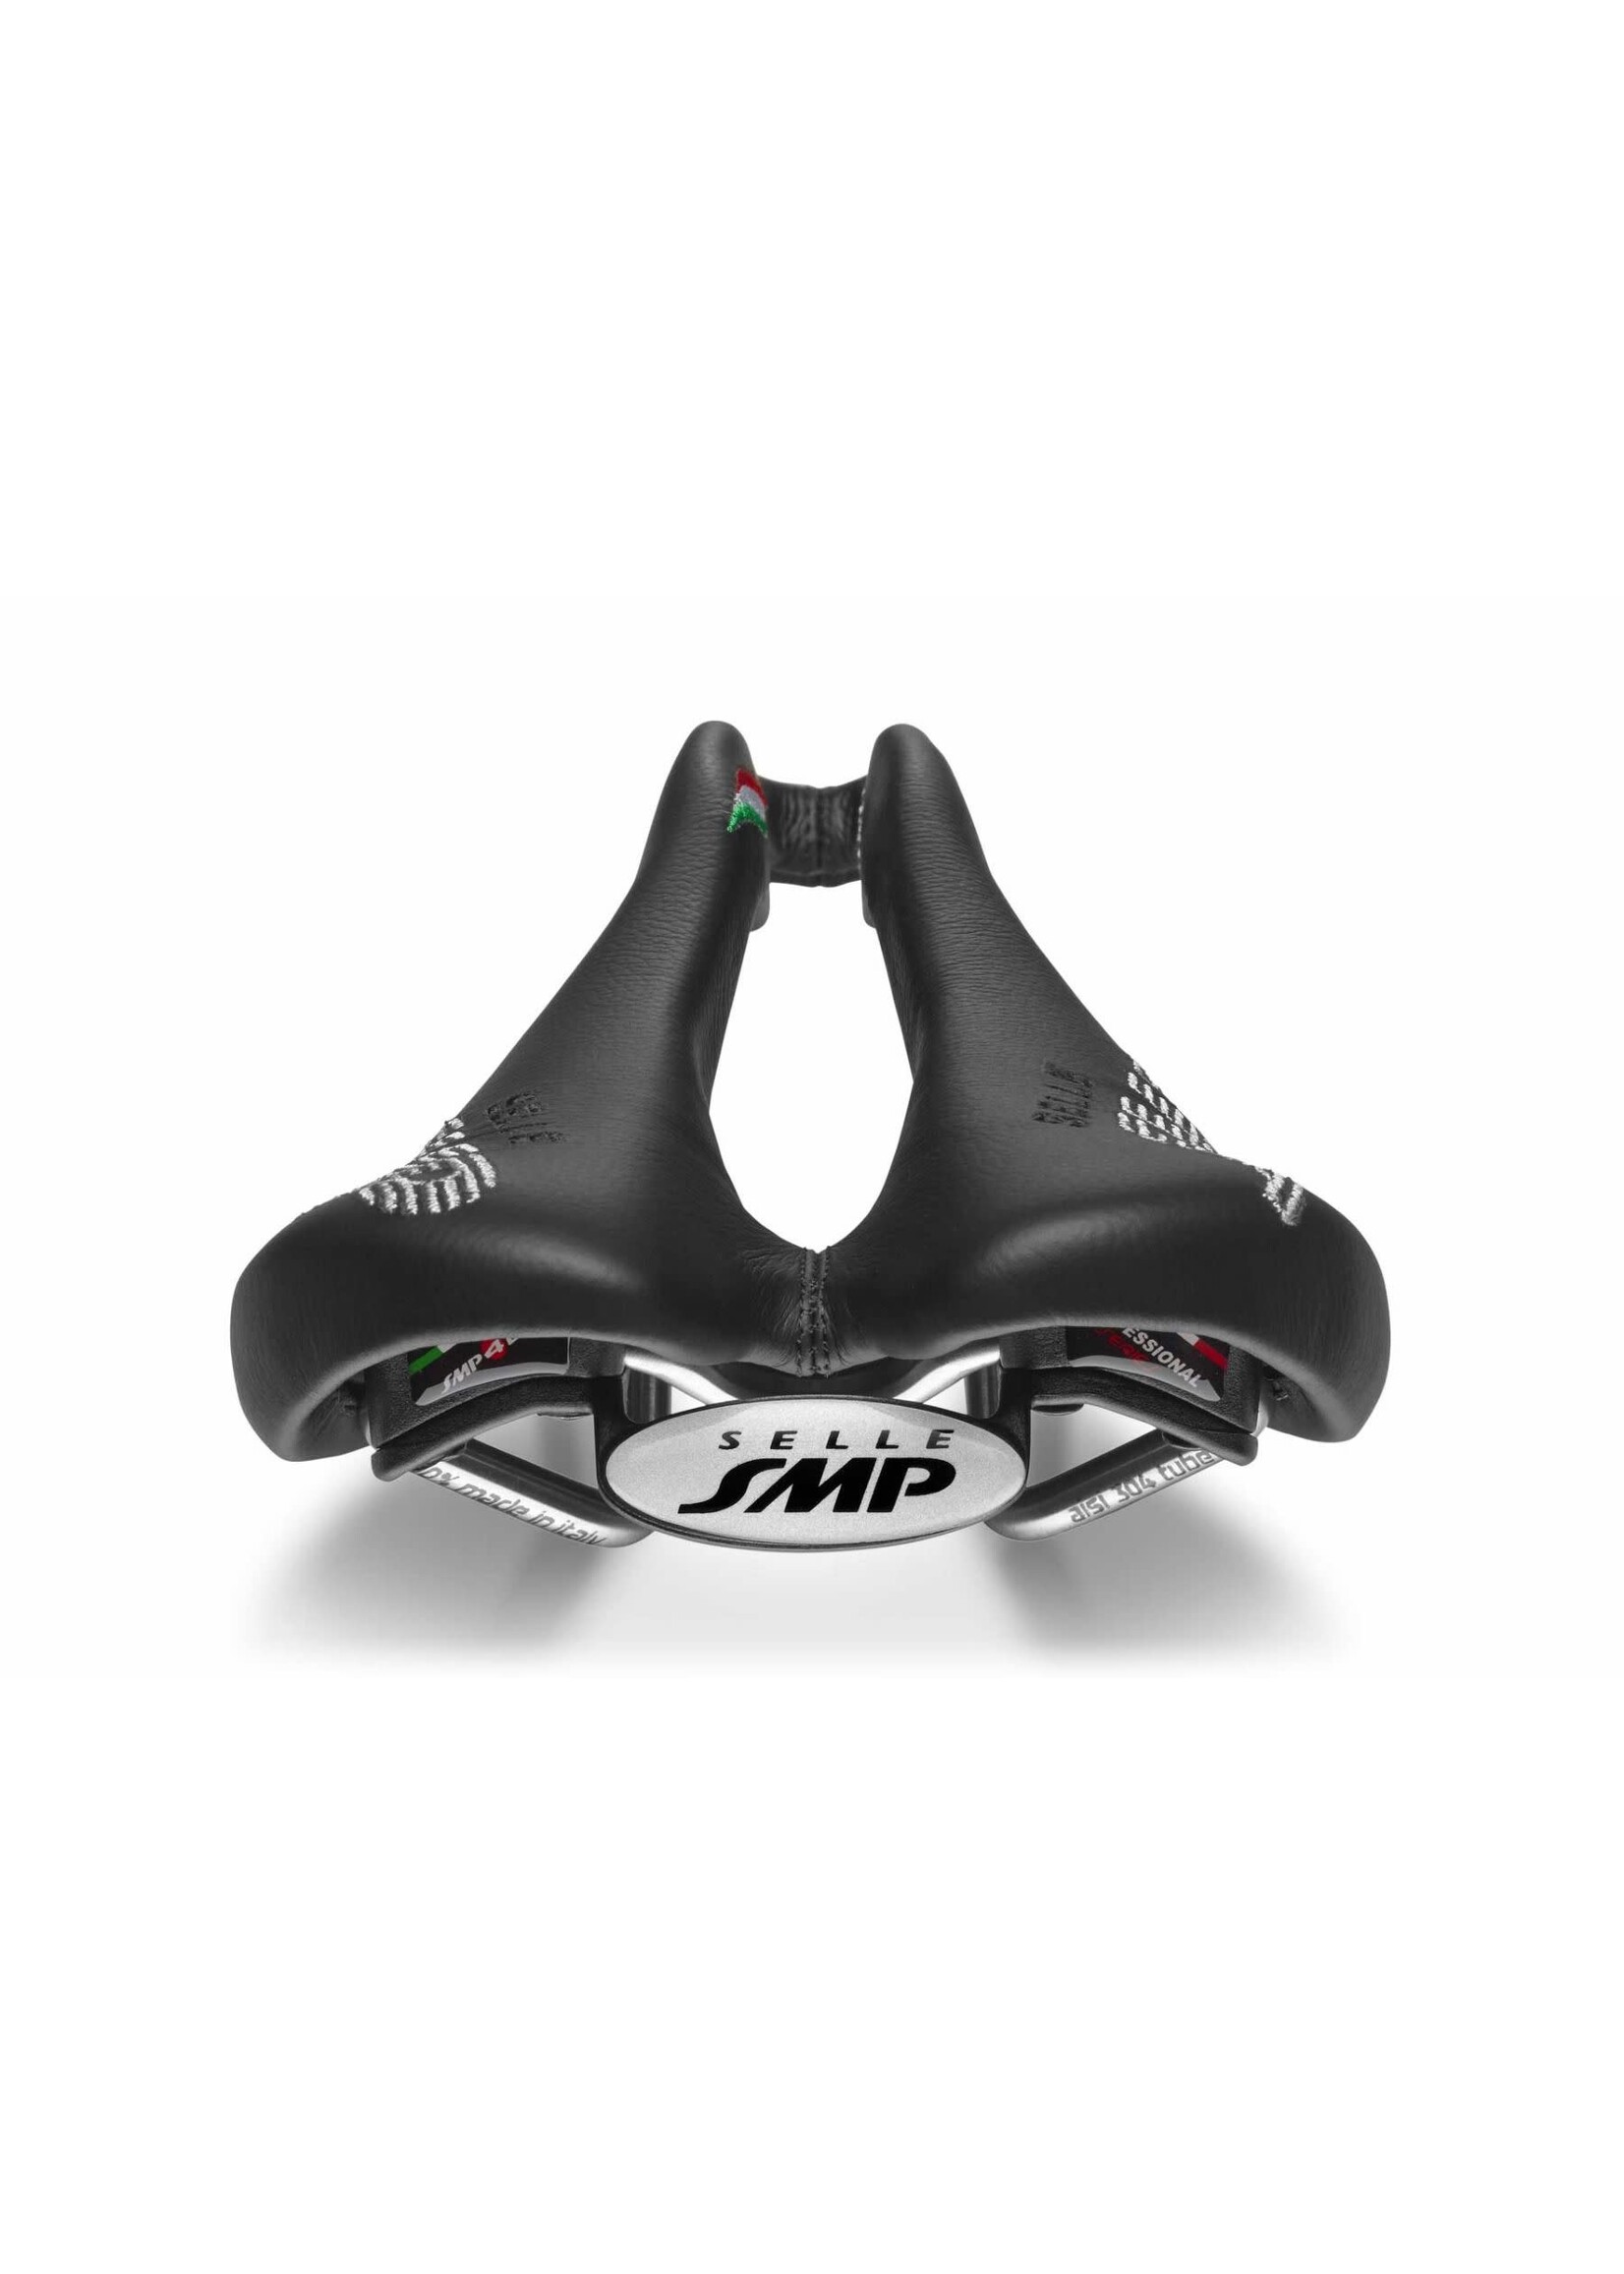 Selle SMP SMP - Selle - Glider